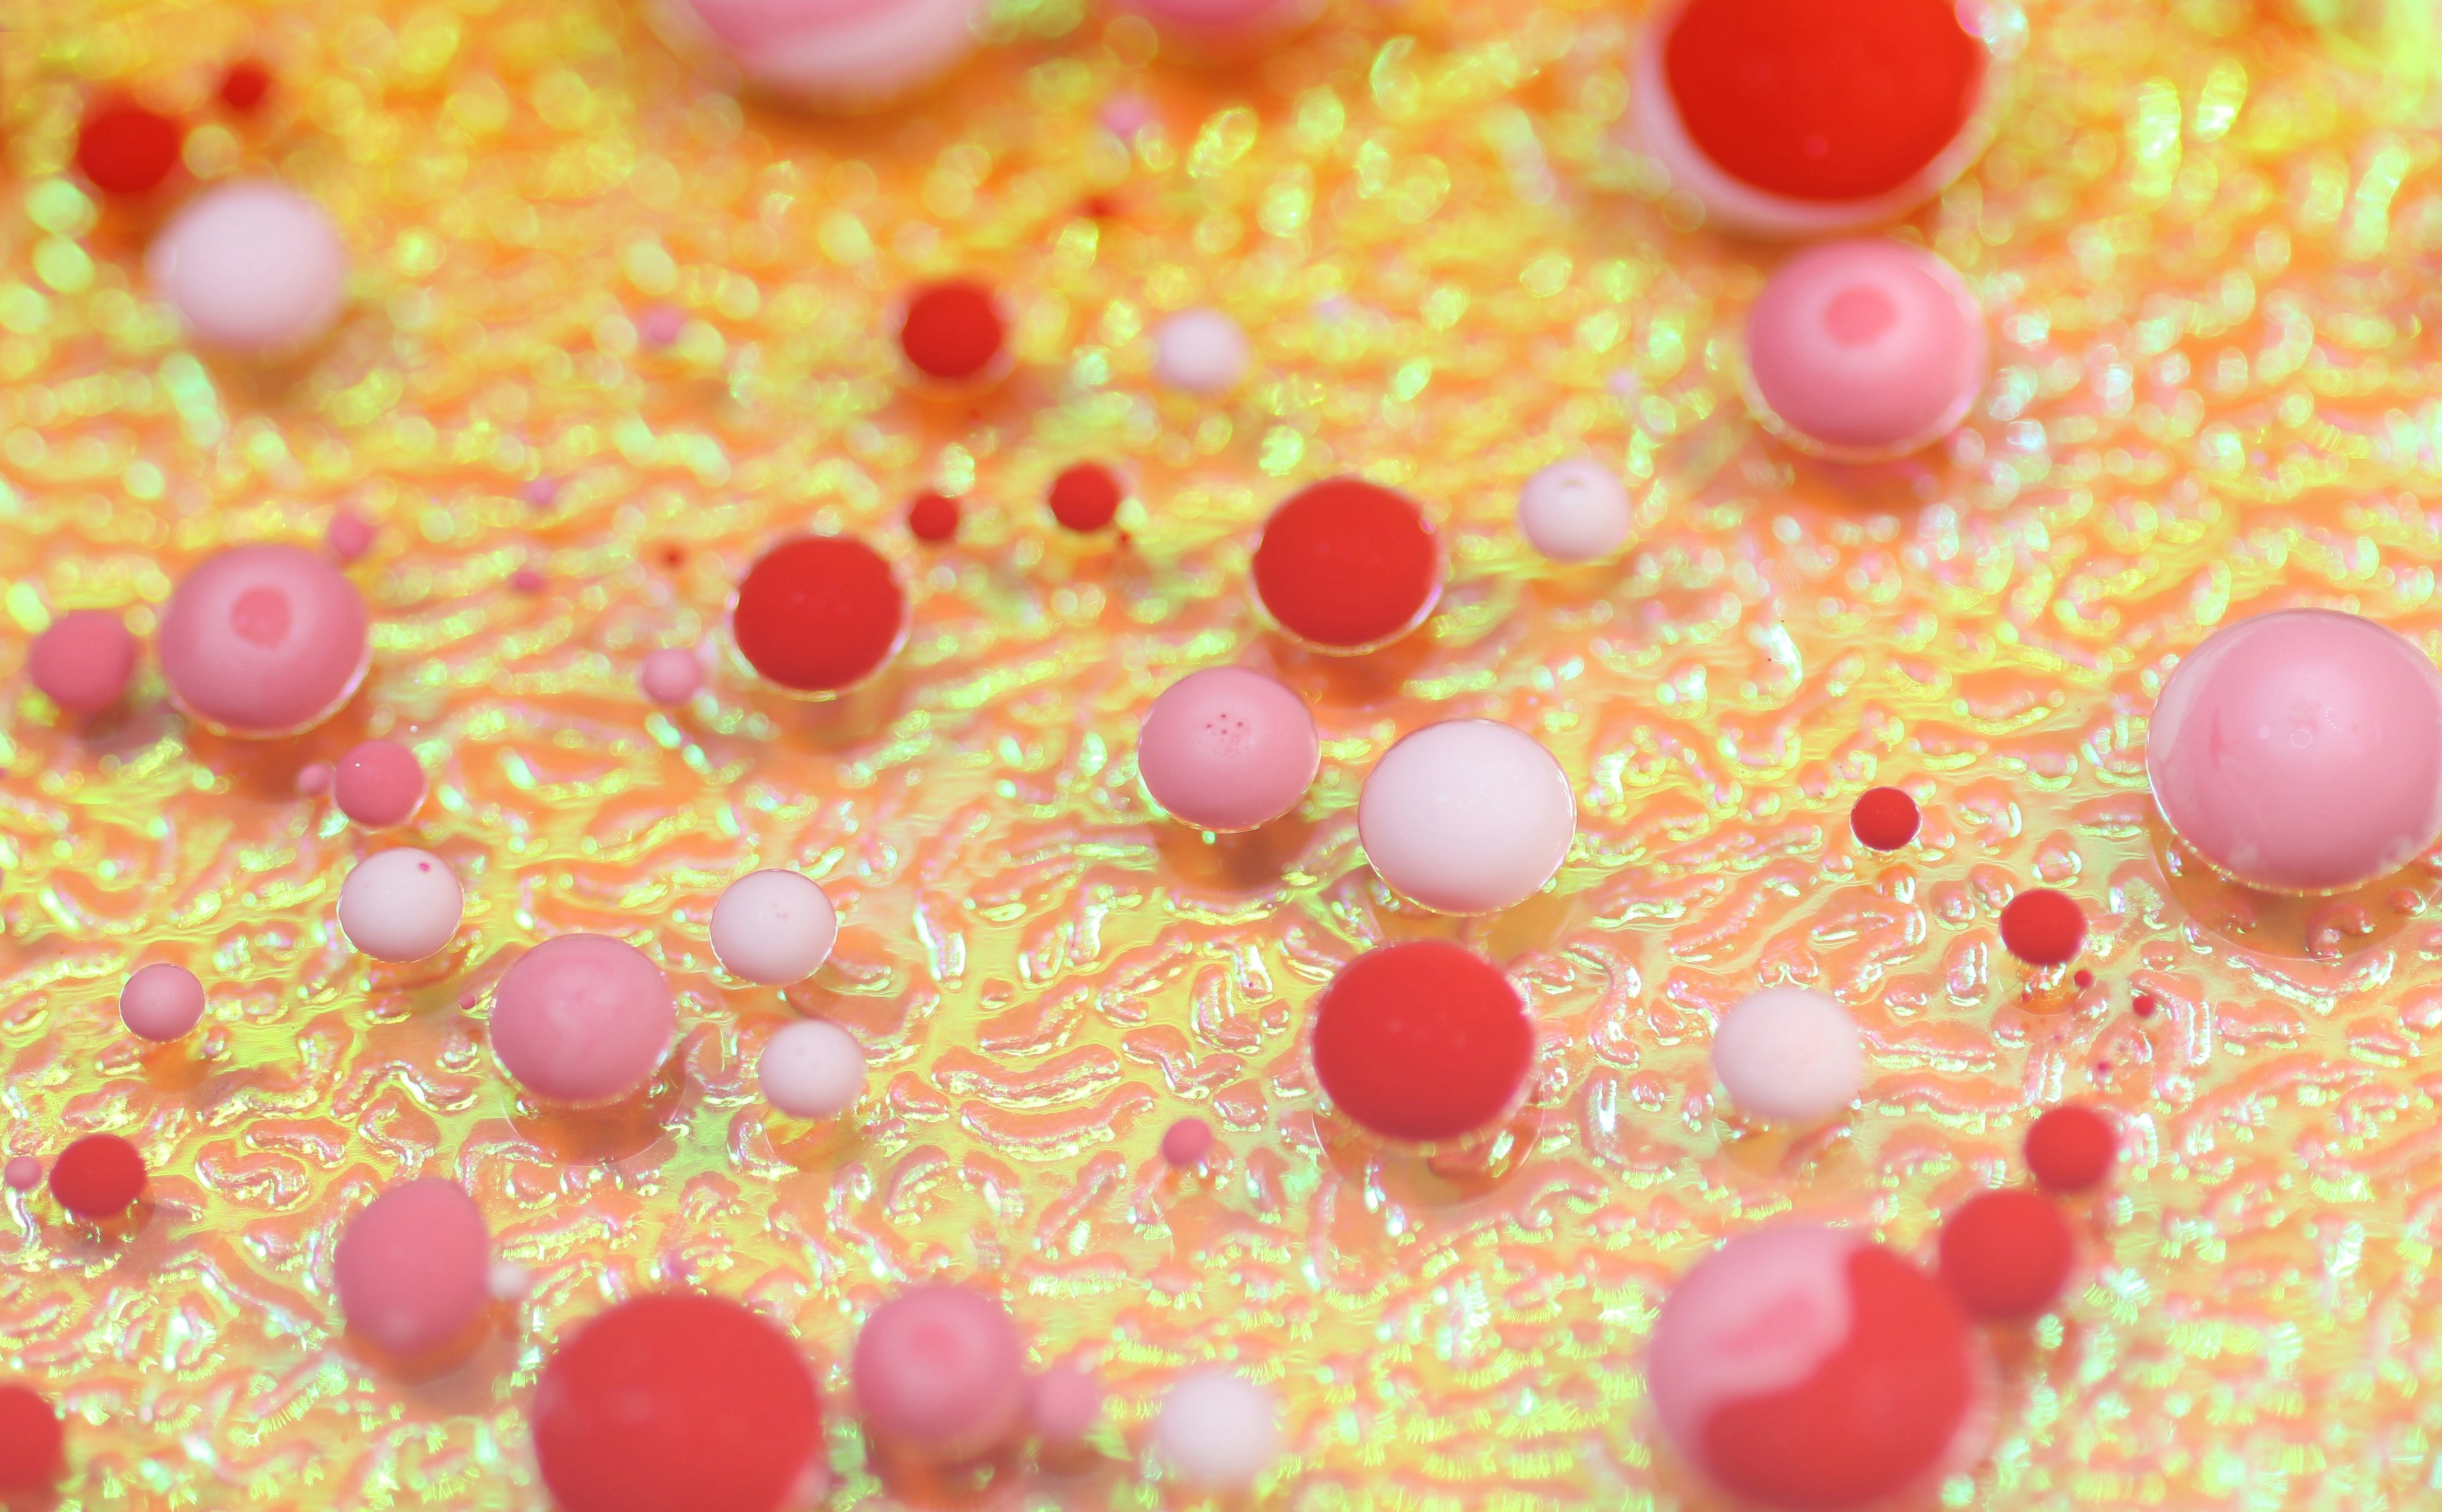 a collection of red, pink, and white blobs against a yellow background